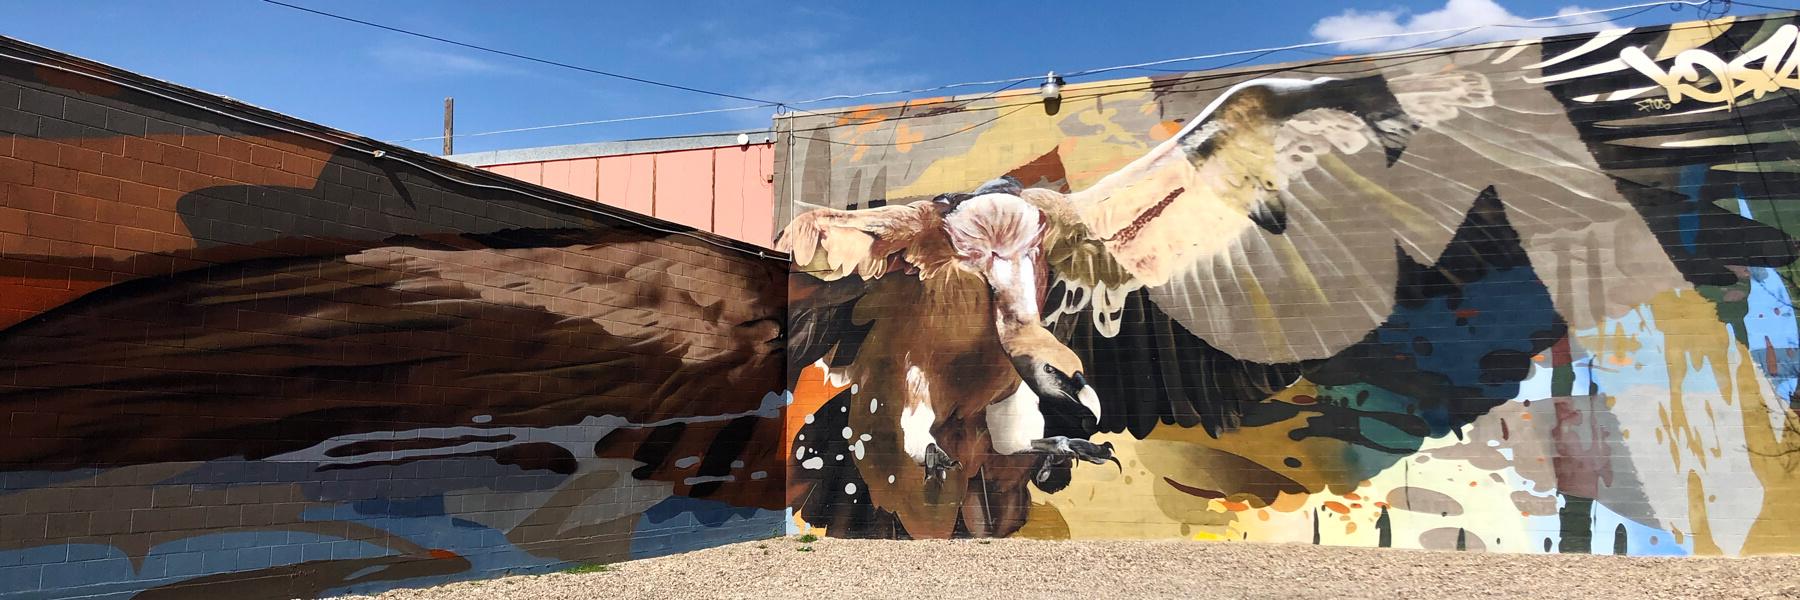 Plateau by Arcy Mural in Rock Springs